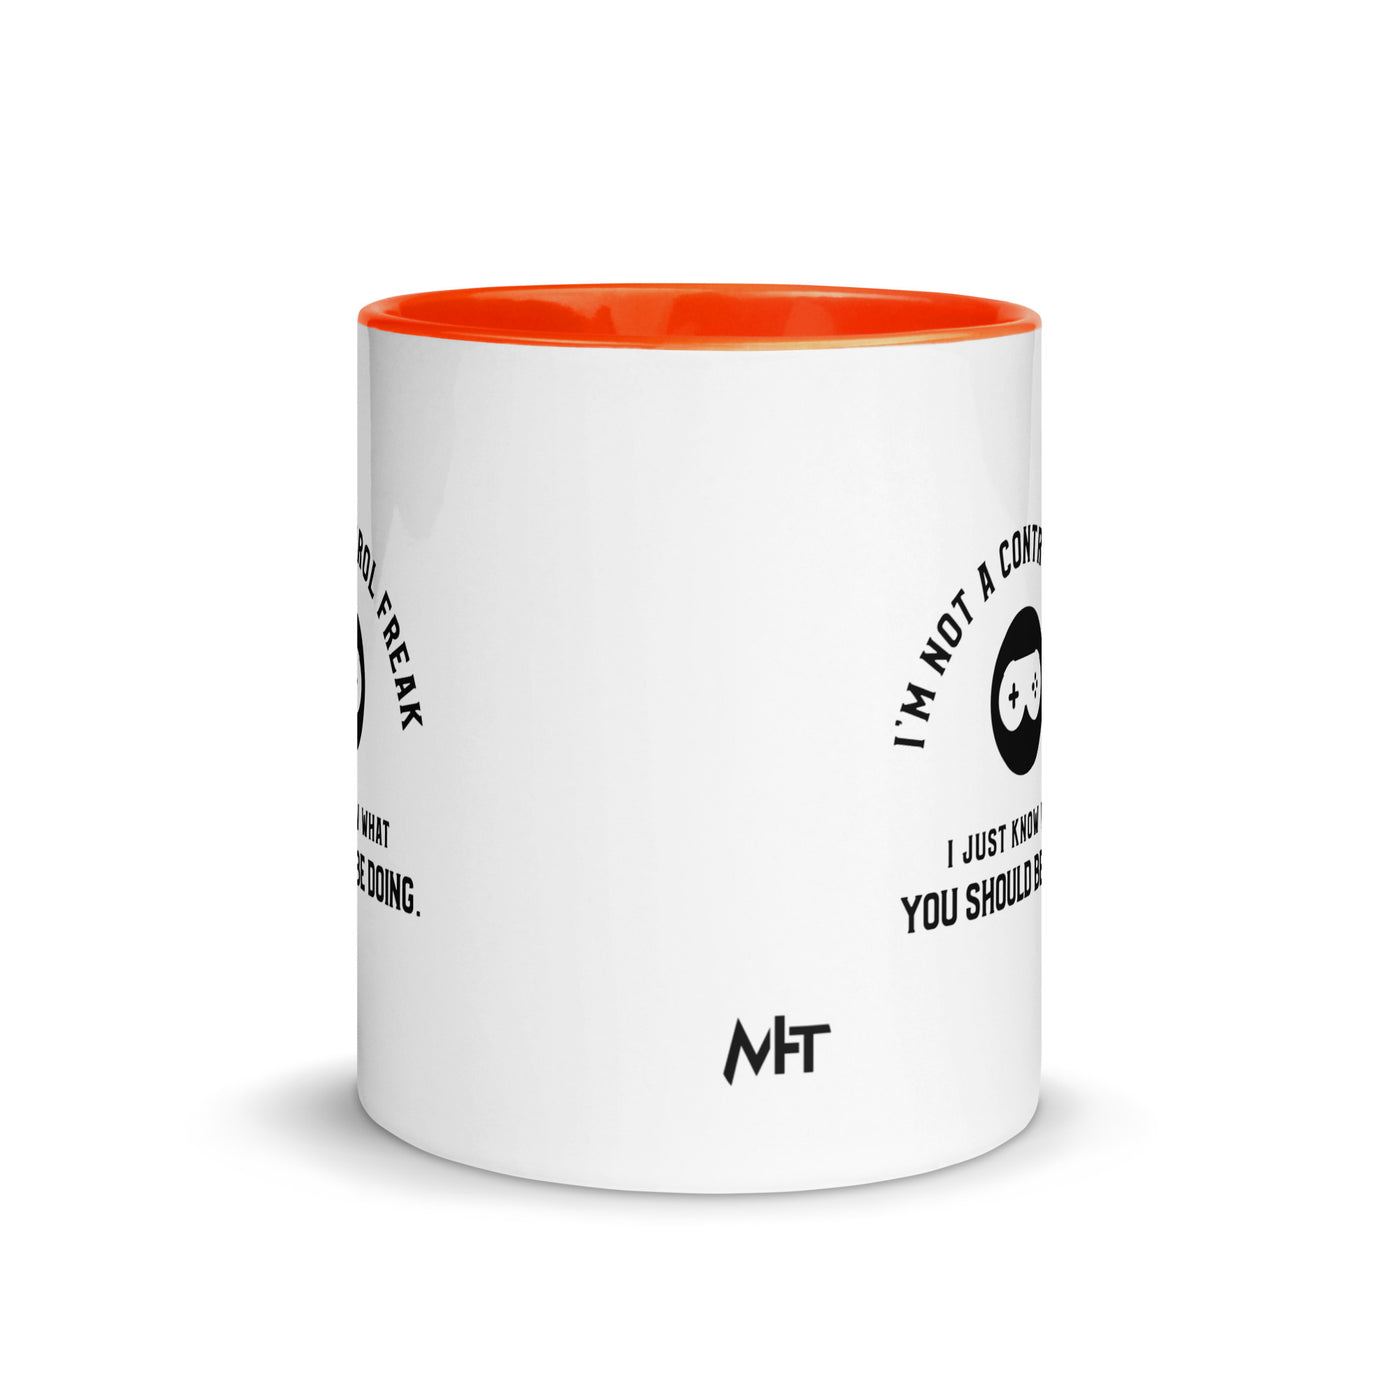 I am not a Control freak, I just Know what you should be doing - Mug with Color Inside